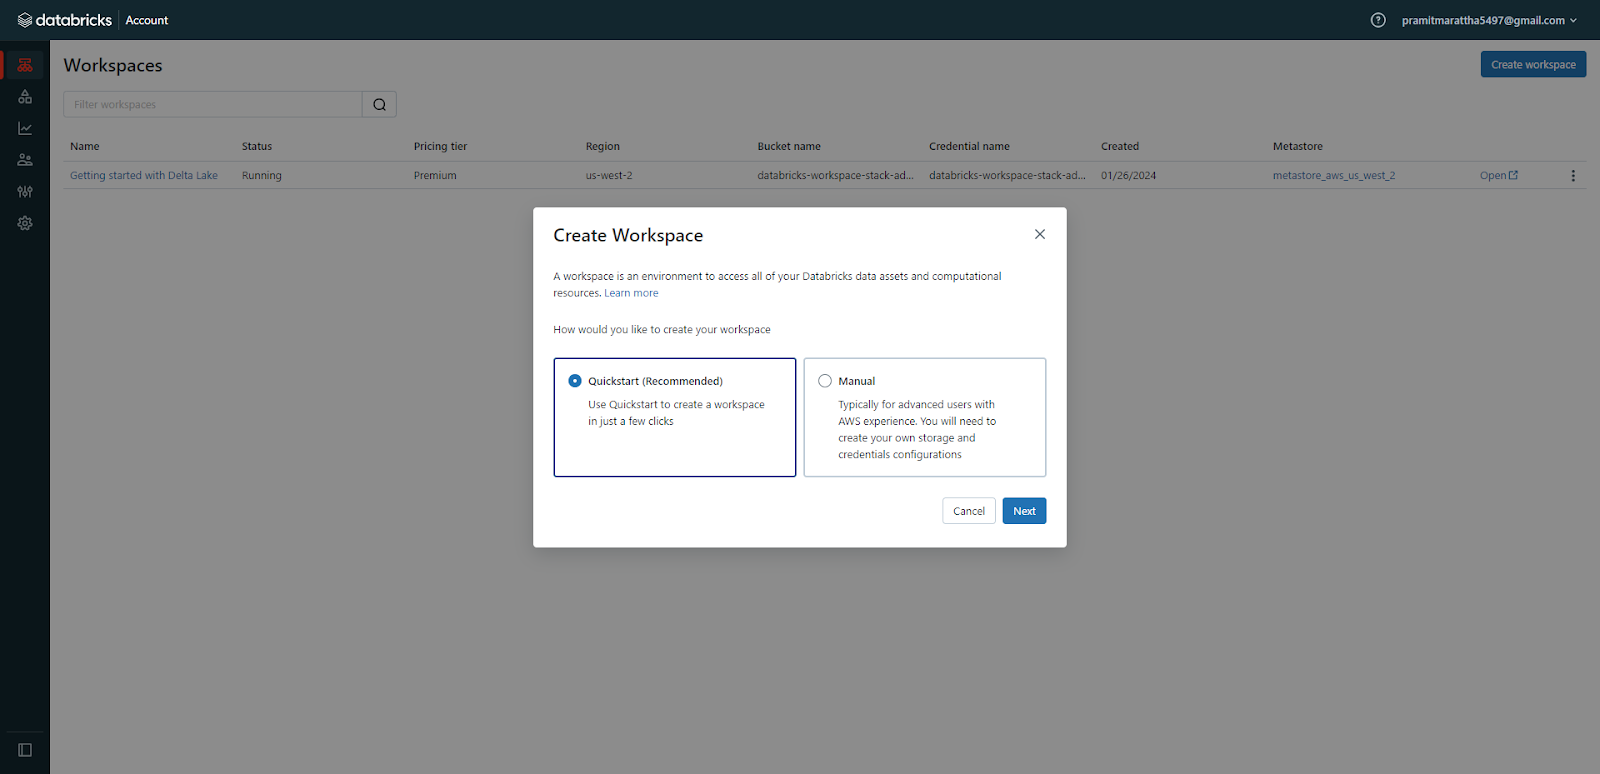 Creating a Databricks workspace and selecting the quickstart deployment option